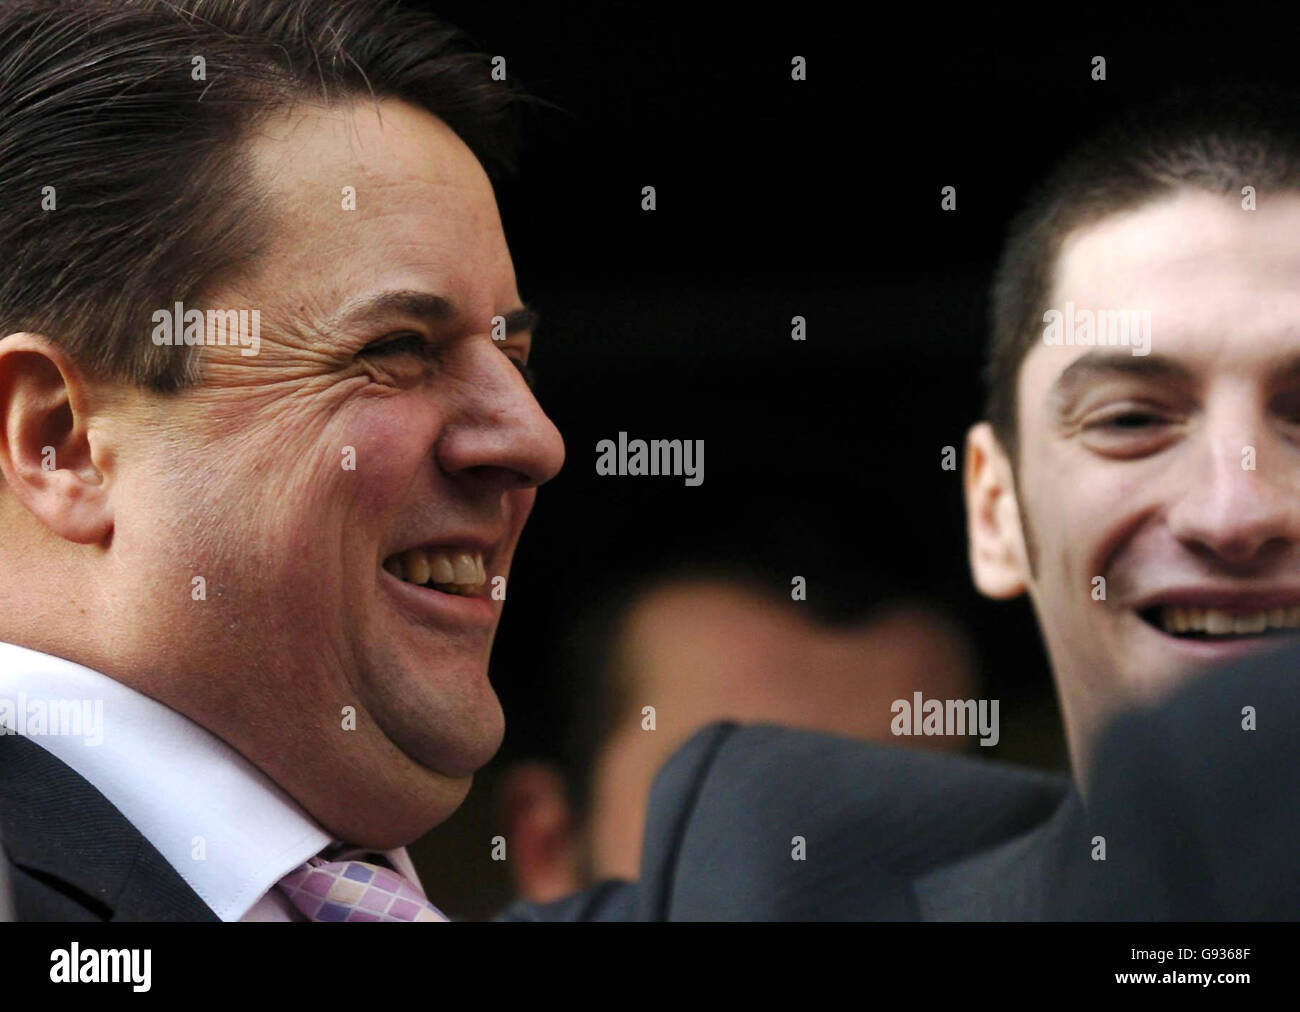 The leader of the BNP Nick Griffin (left) and Mark Collett also of the BNP arrive at Leeds Crown Court, Tuesday January 17, 2006, where the prosecution is expected to begin opening its case against British National Party leader Nick Griffin, who is accused of a series of race hate charges. Griffin, 45, and fellow party activist Mark Collett, 24, face charges arising out of speeches featured in an undercover BBC documentary on the party. See PA Story COURTS BNP. PRESS ASSOCIATION Photo. Photo credit should read: John Giles/PA Stock Photo